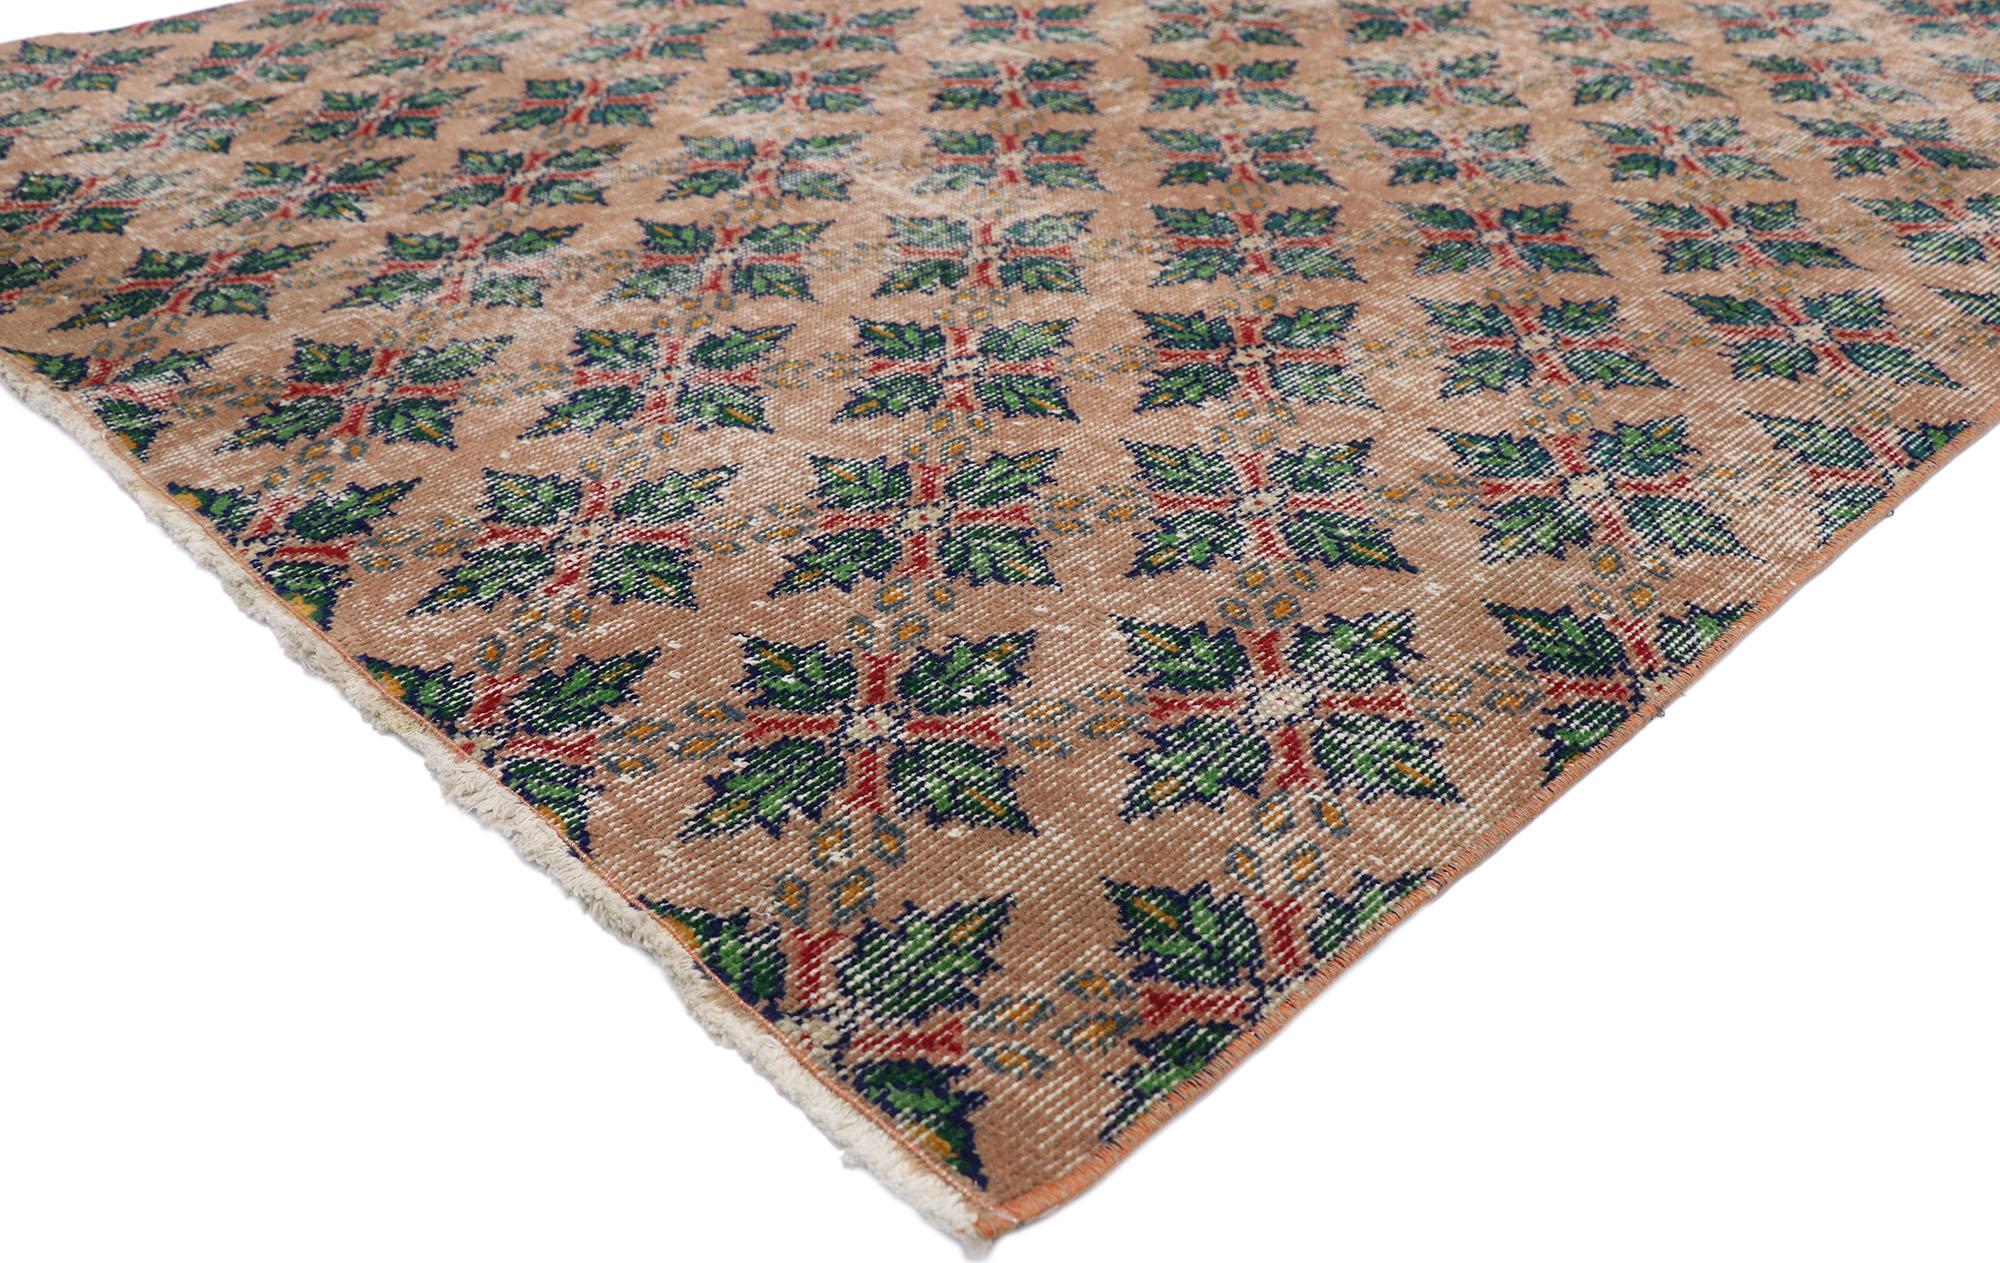 52596, Distressed Vintage Turkish Sivas Rug with Arts & Crafts Cottage Style 05'00 x 06'10 . Reflecting elements of nature and Biophilic design, this hand knotted wool distressed vintage Turkish Sivas rug awakens the soul with elevated Arts and